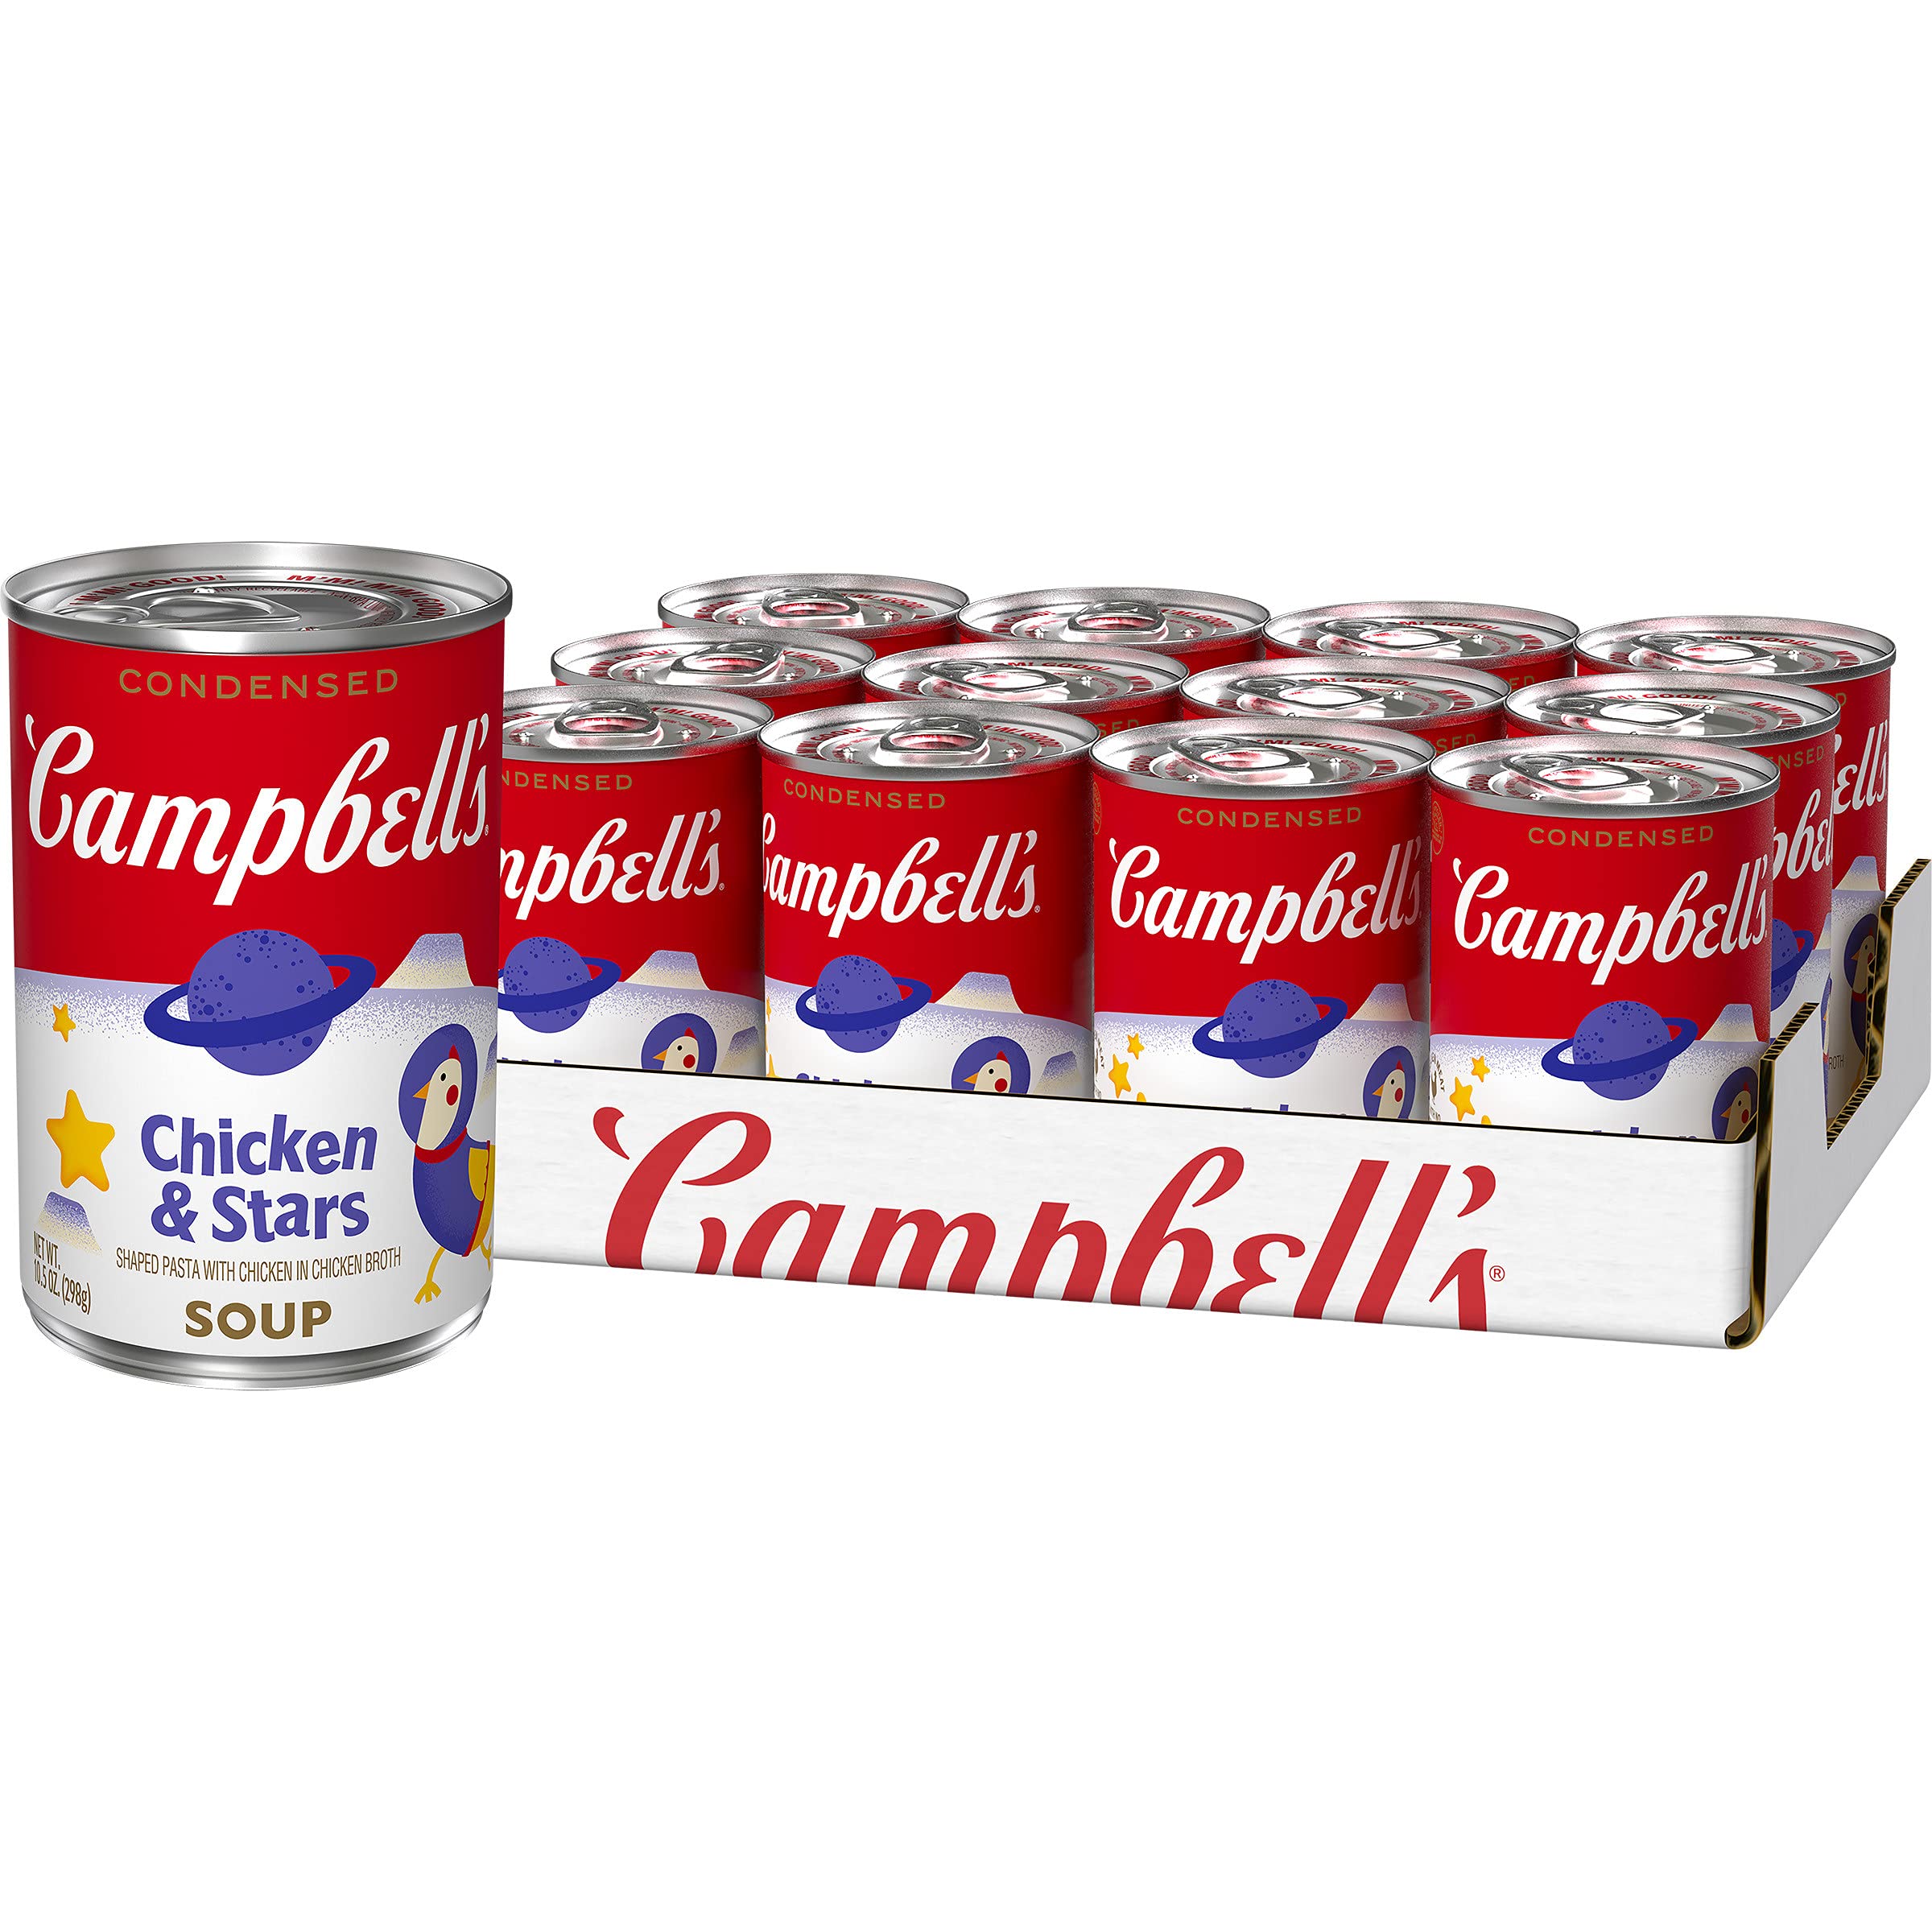 Campbell's Condensed Kids Soup, Chicken & Stars Soup, 10.5 Ounce Can (Pack of 12) (Packaging May Vary)